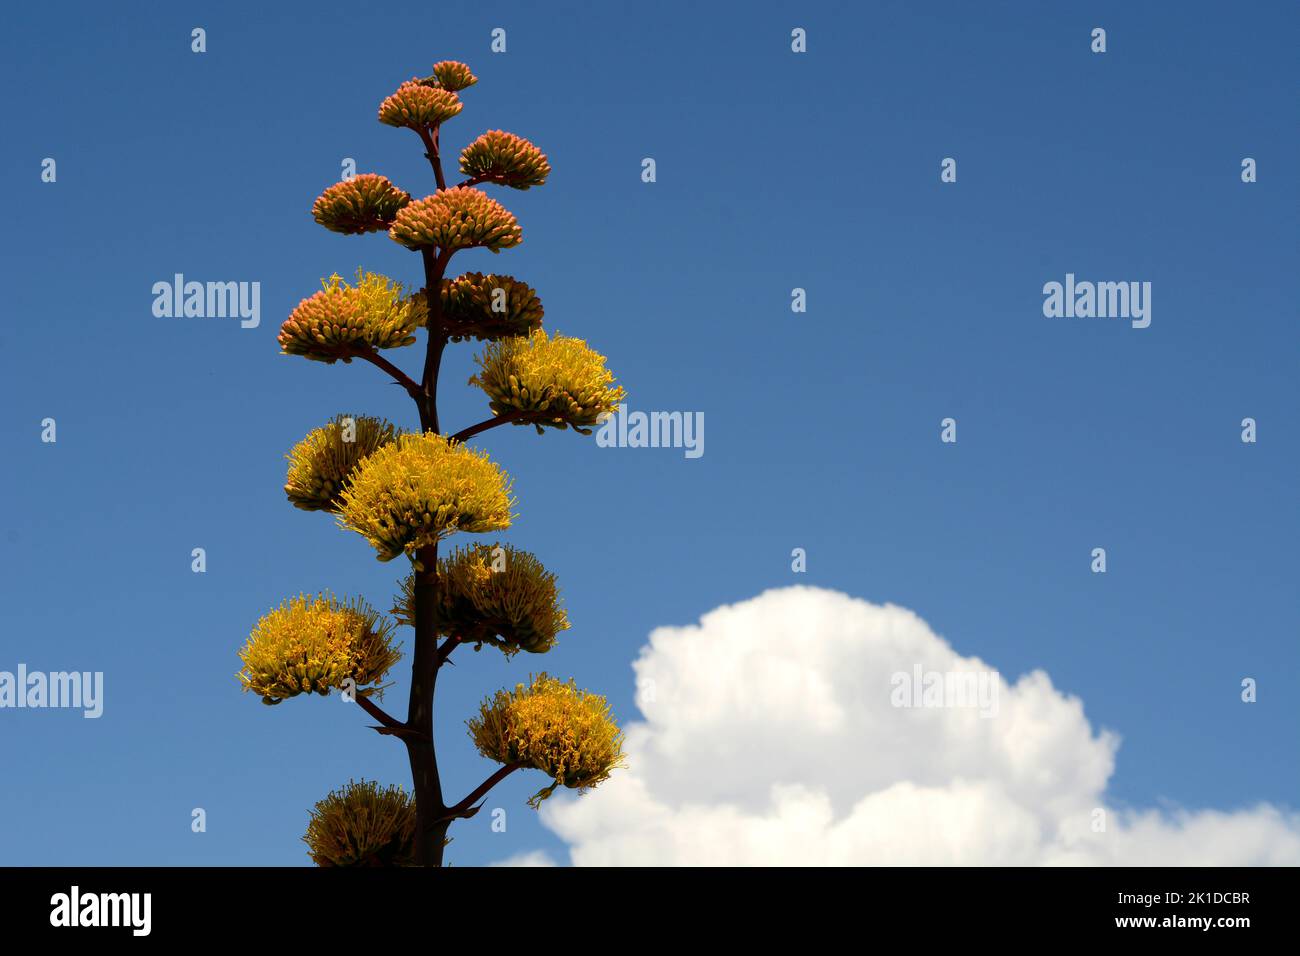 A New Mexico agave plant (Agave Americana), also known as a century plant, blooms in the American desert in New Mexico. Stock Photo